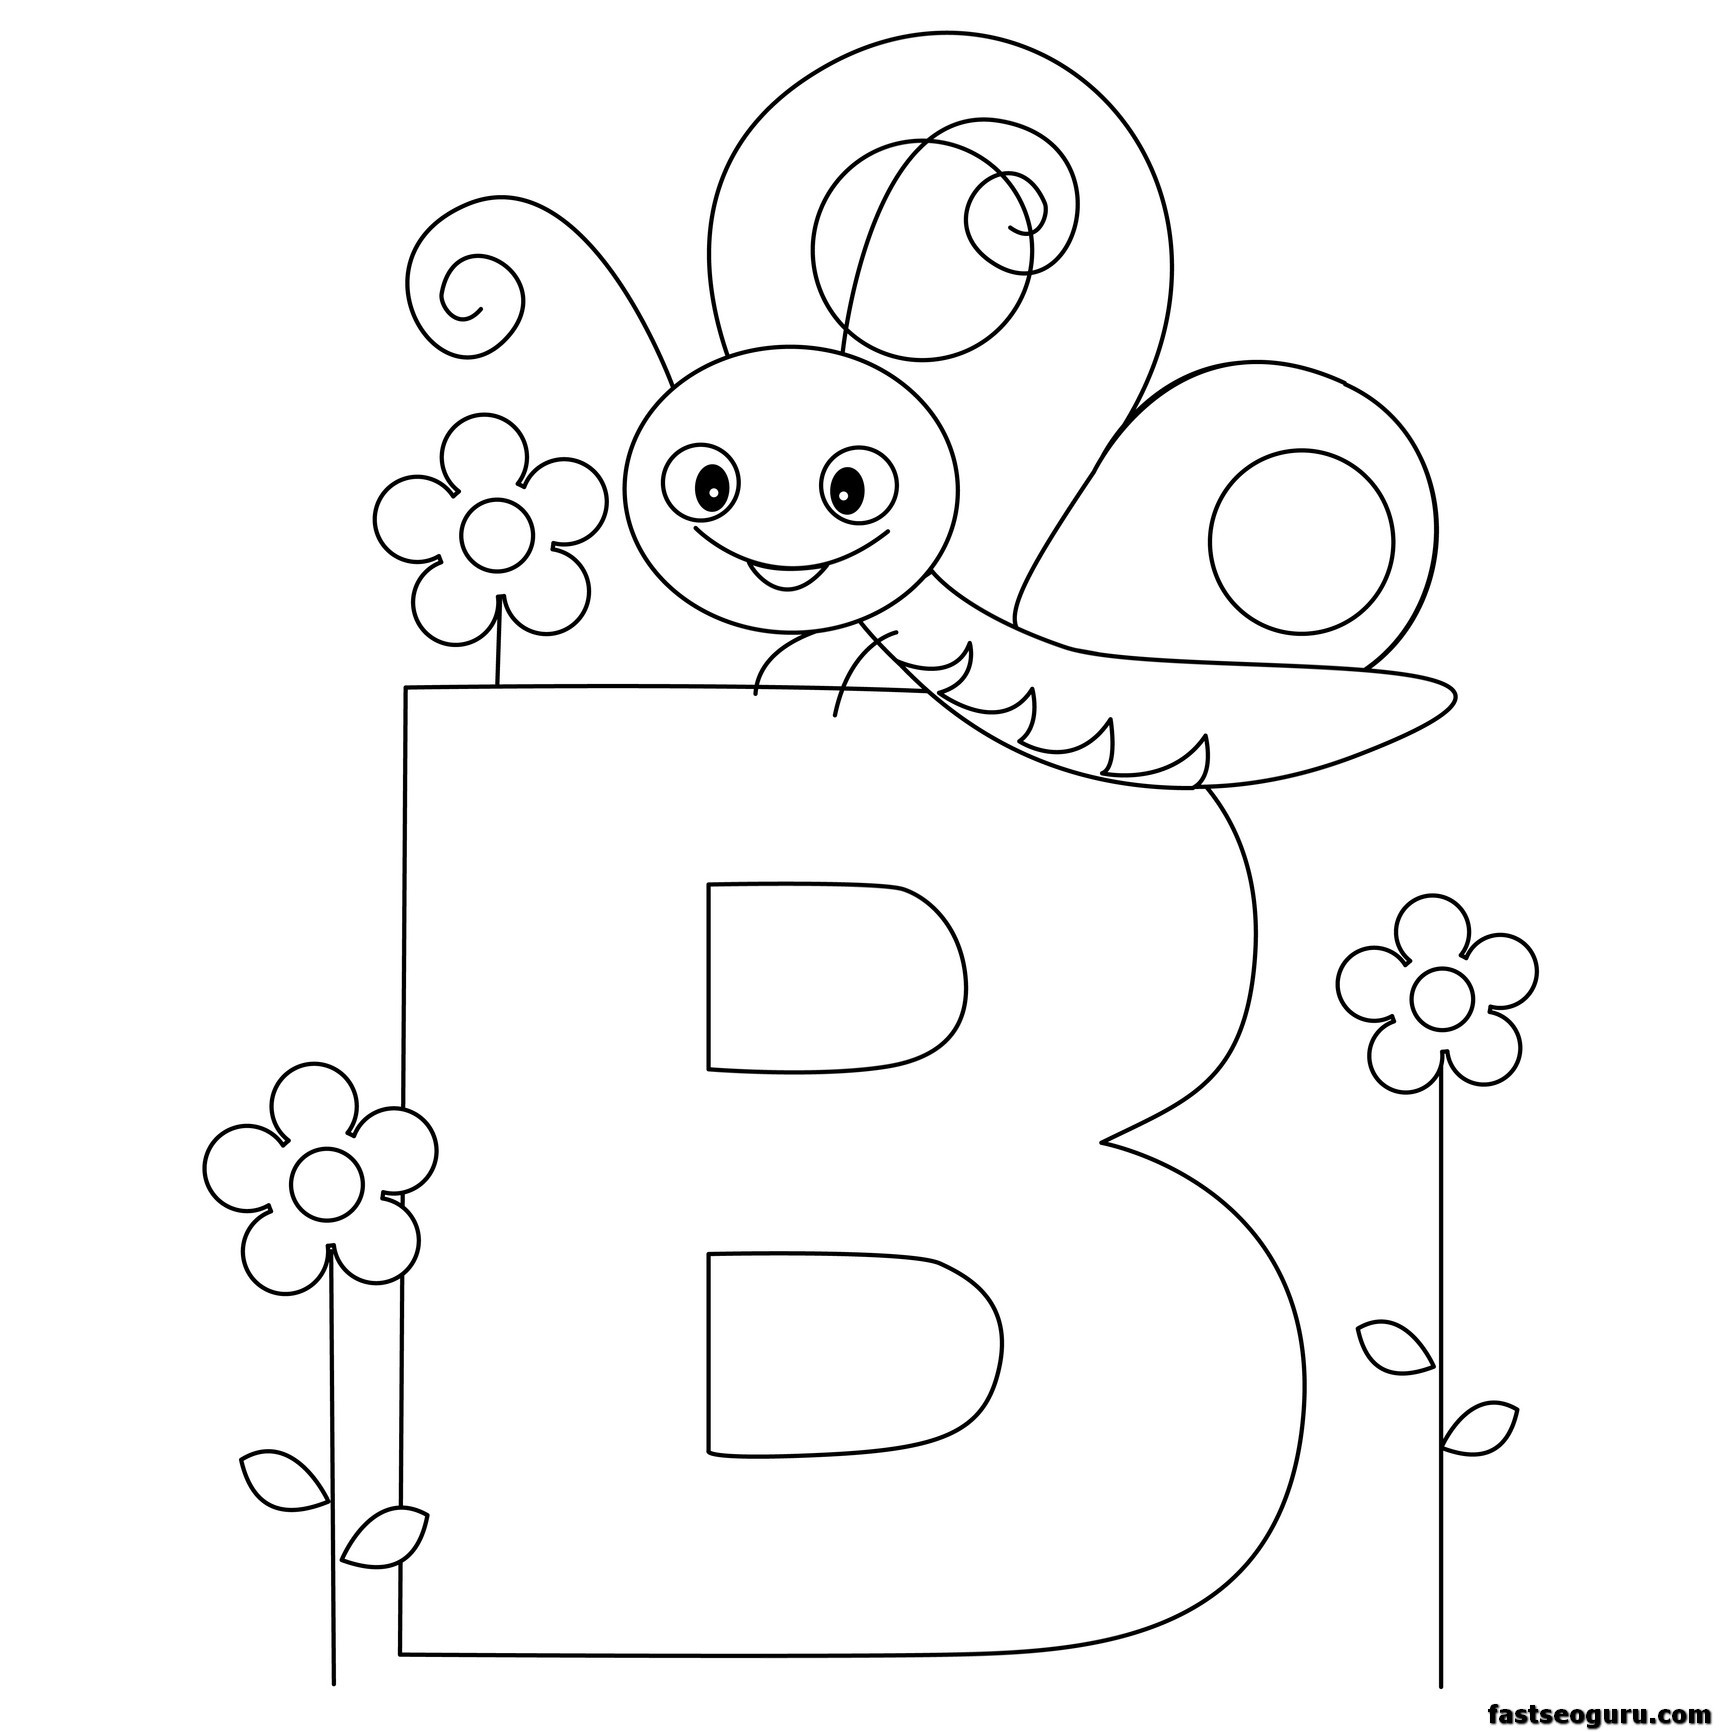 b coloring pages free - photo #46